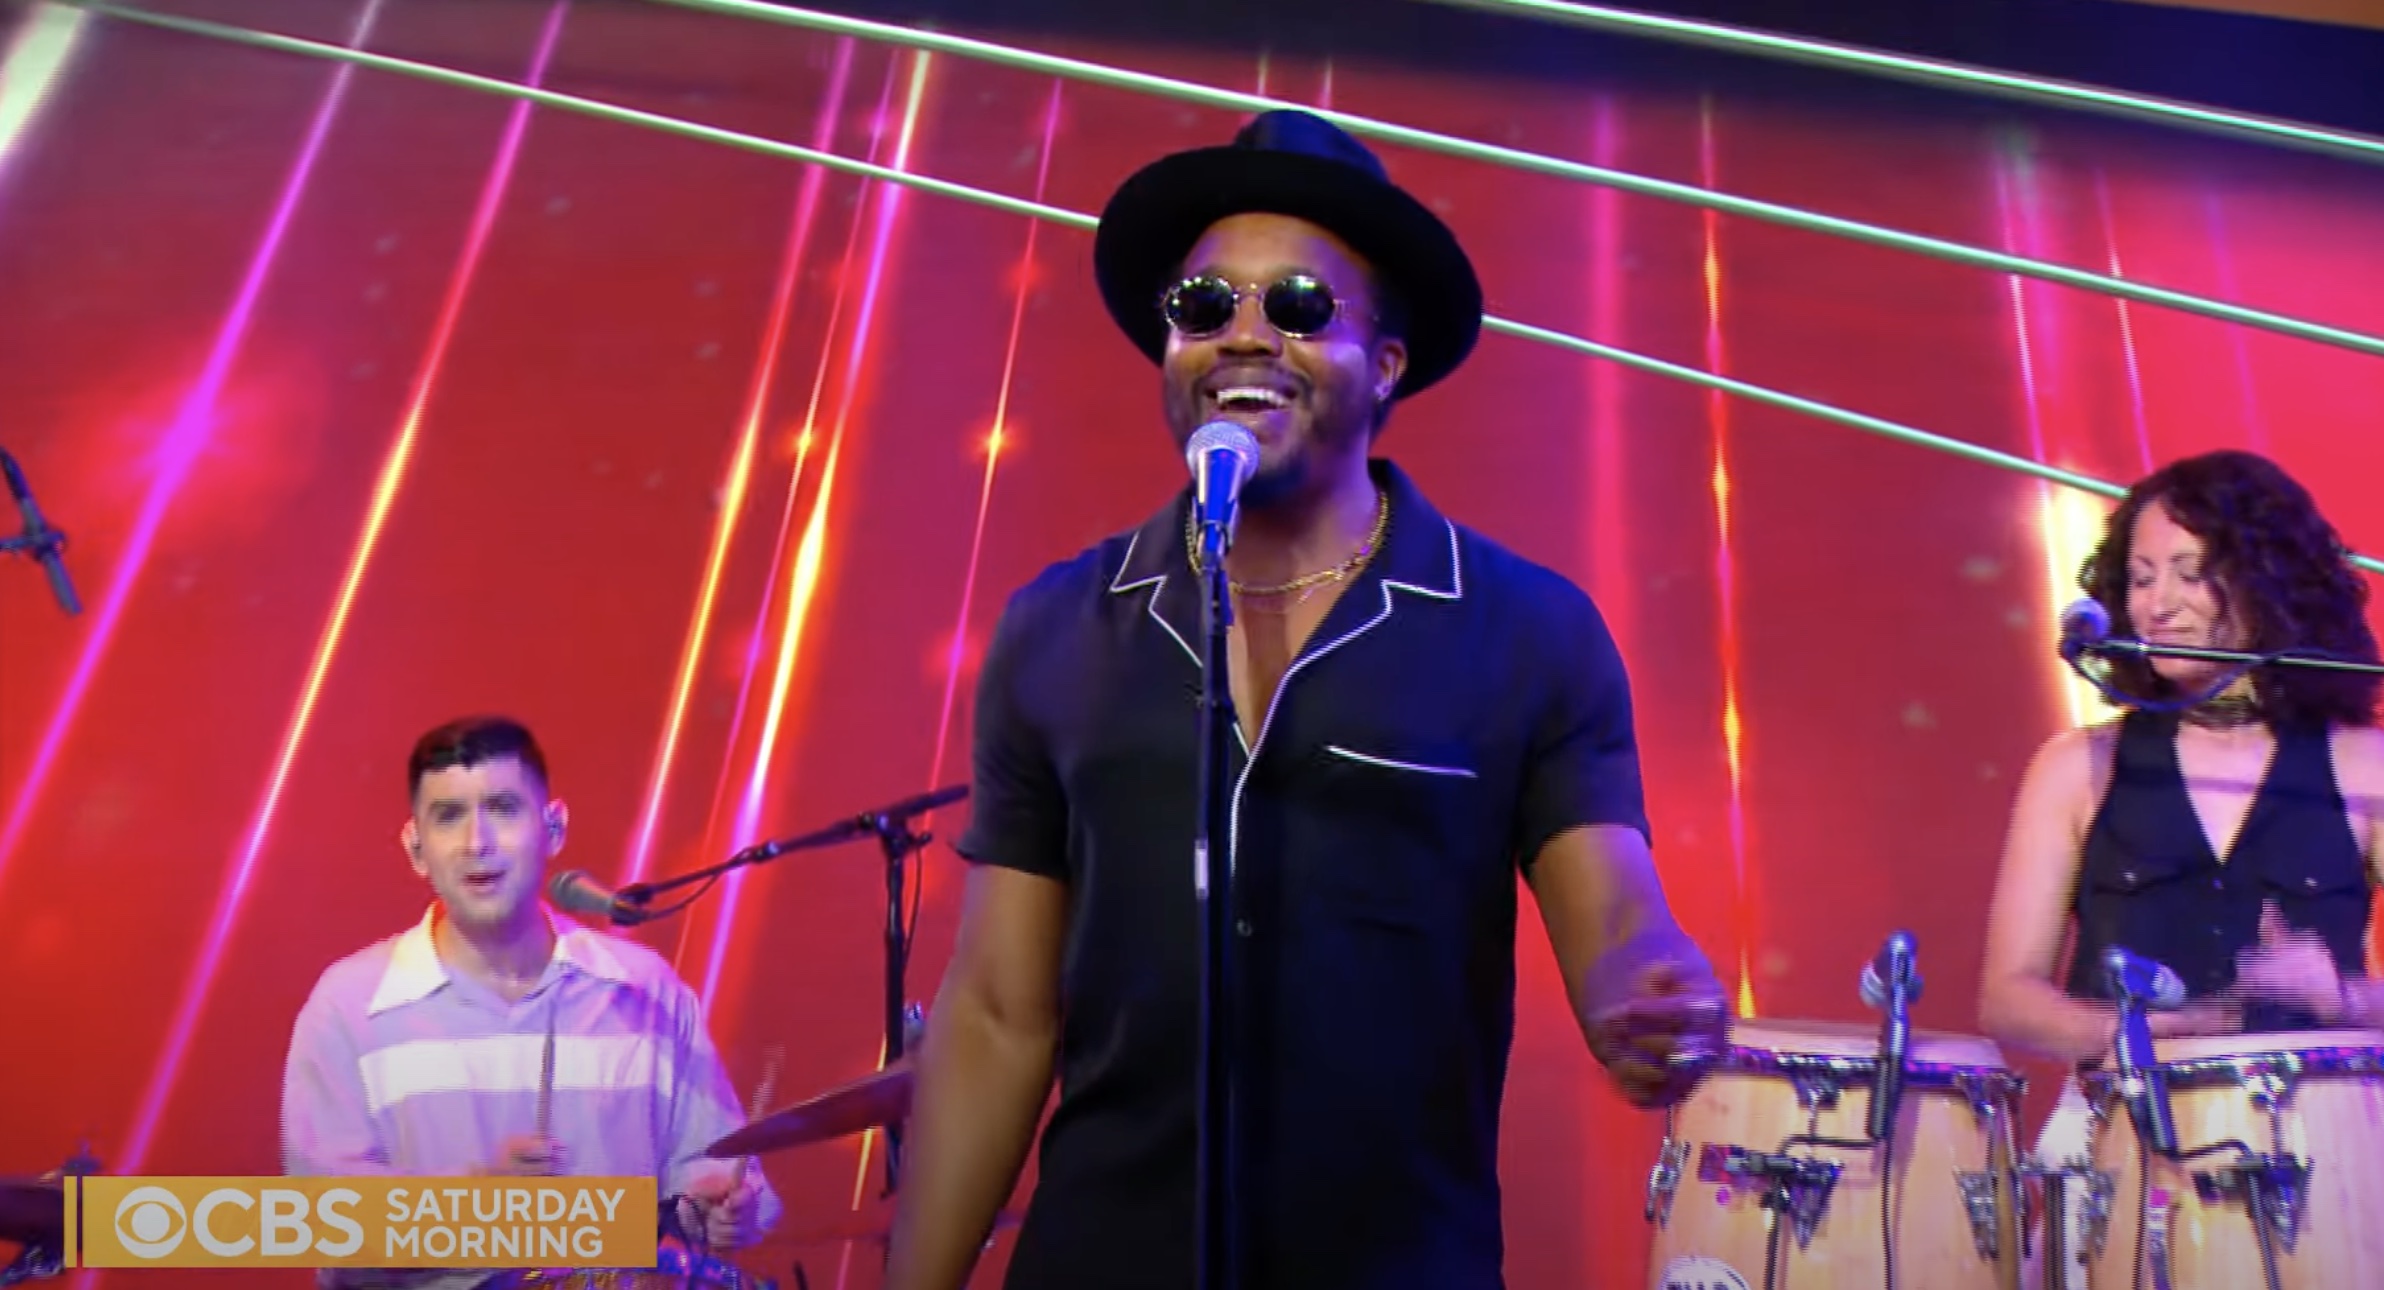 CBS Mornings: Durand Jones and the Indications bring retro-soul songs to CBS Mornings